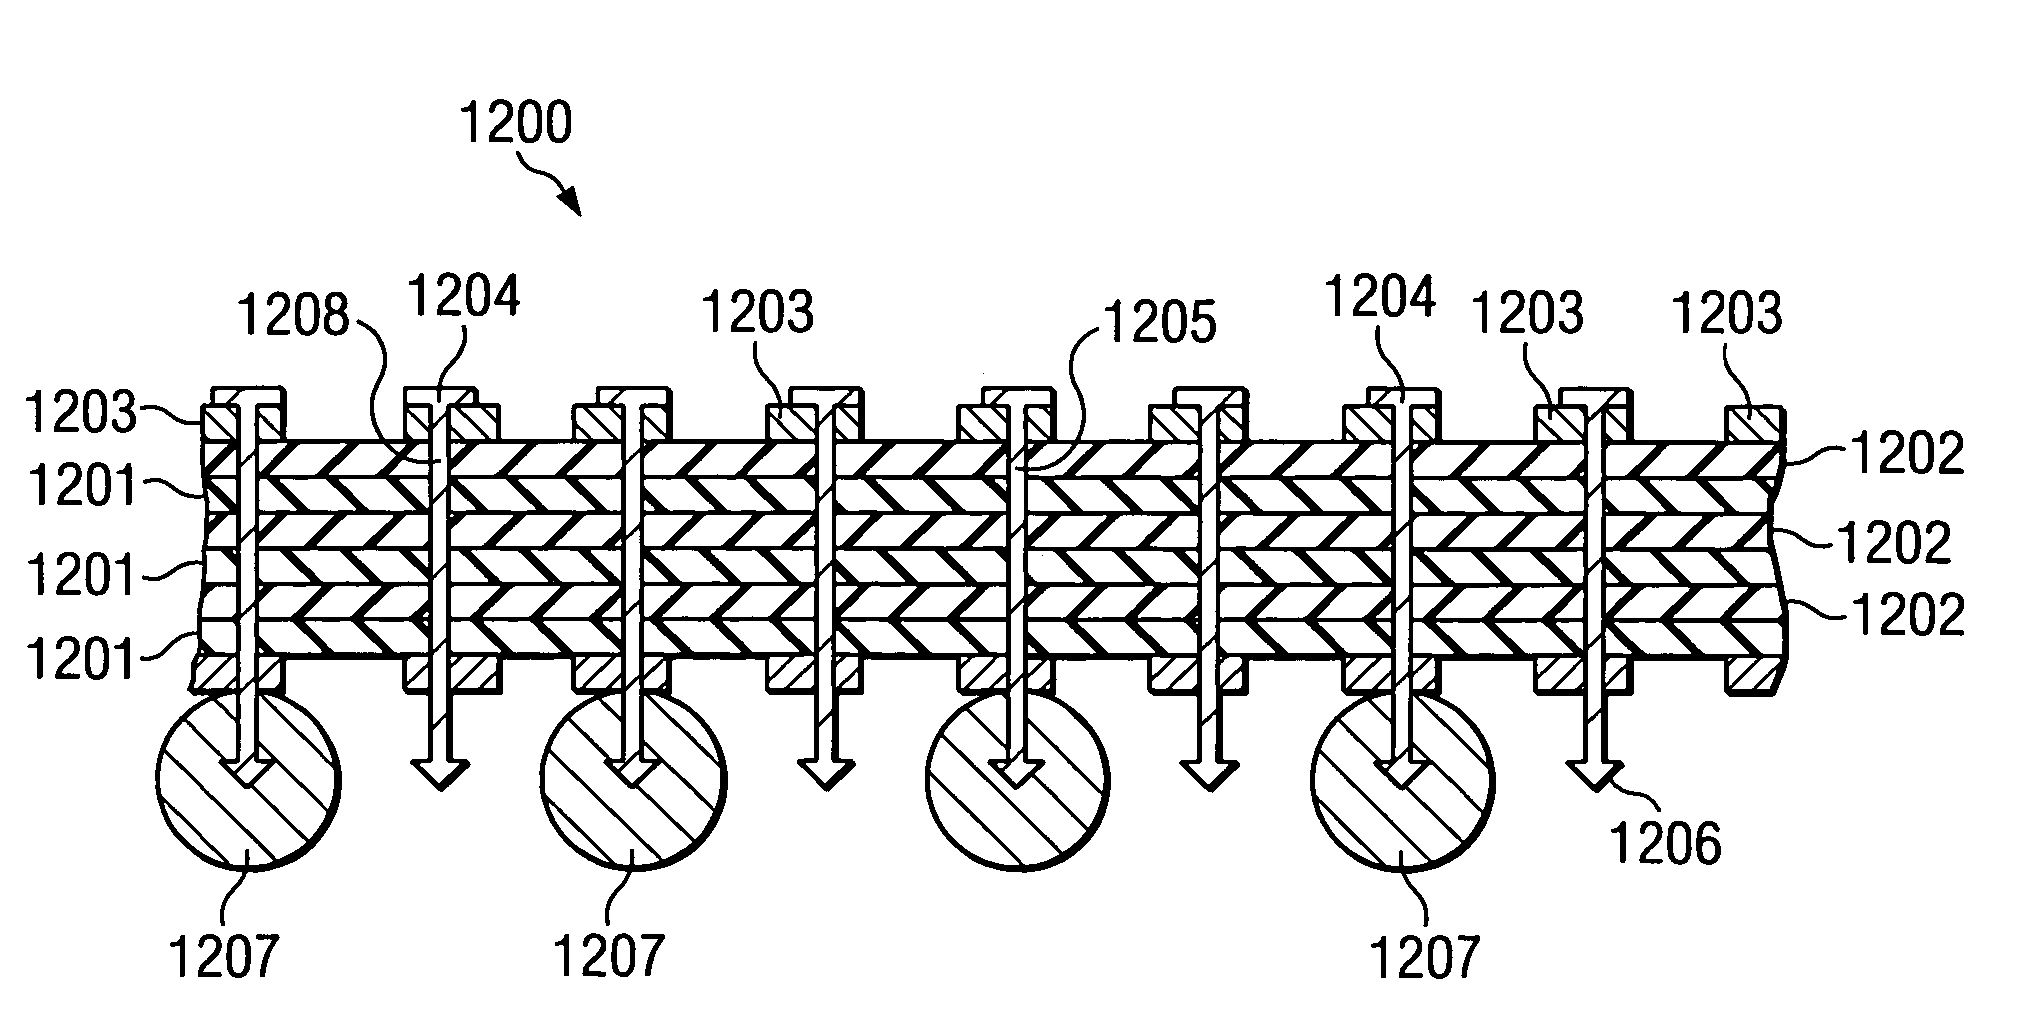 Semiconductor package having a grid array of pin-attached balls